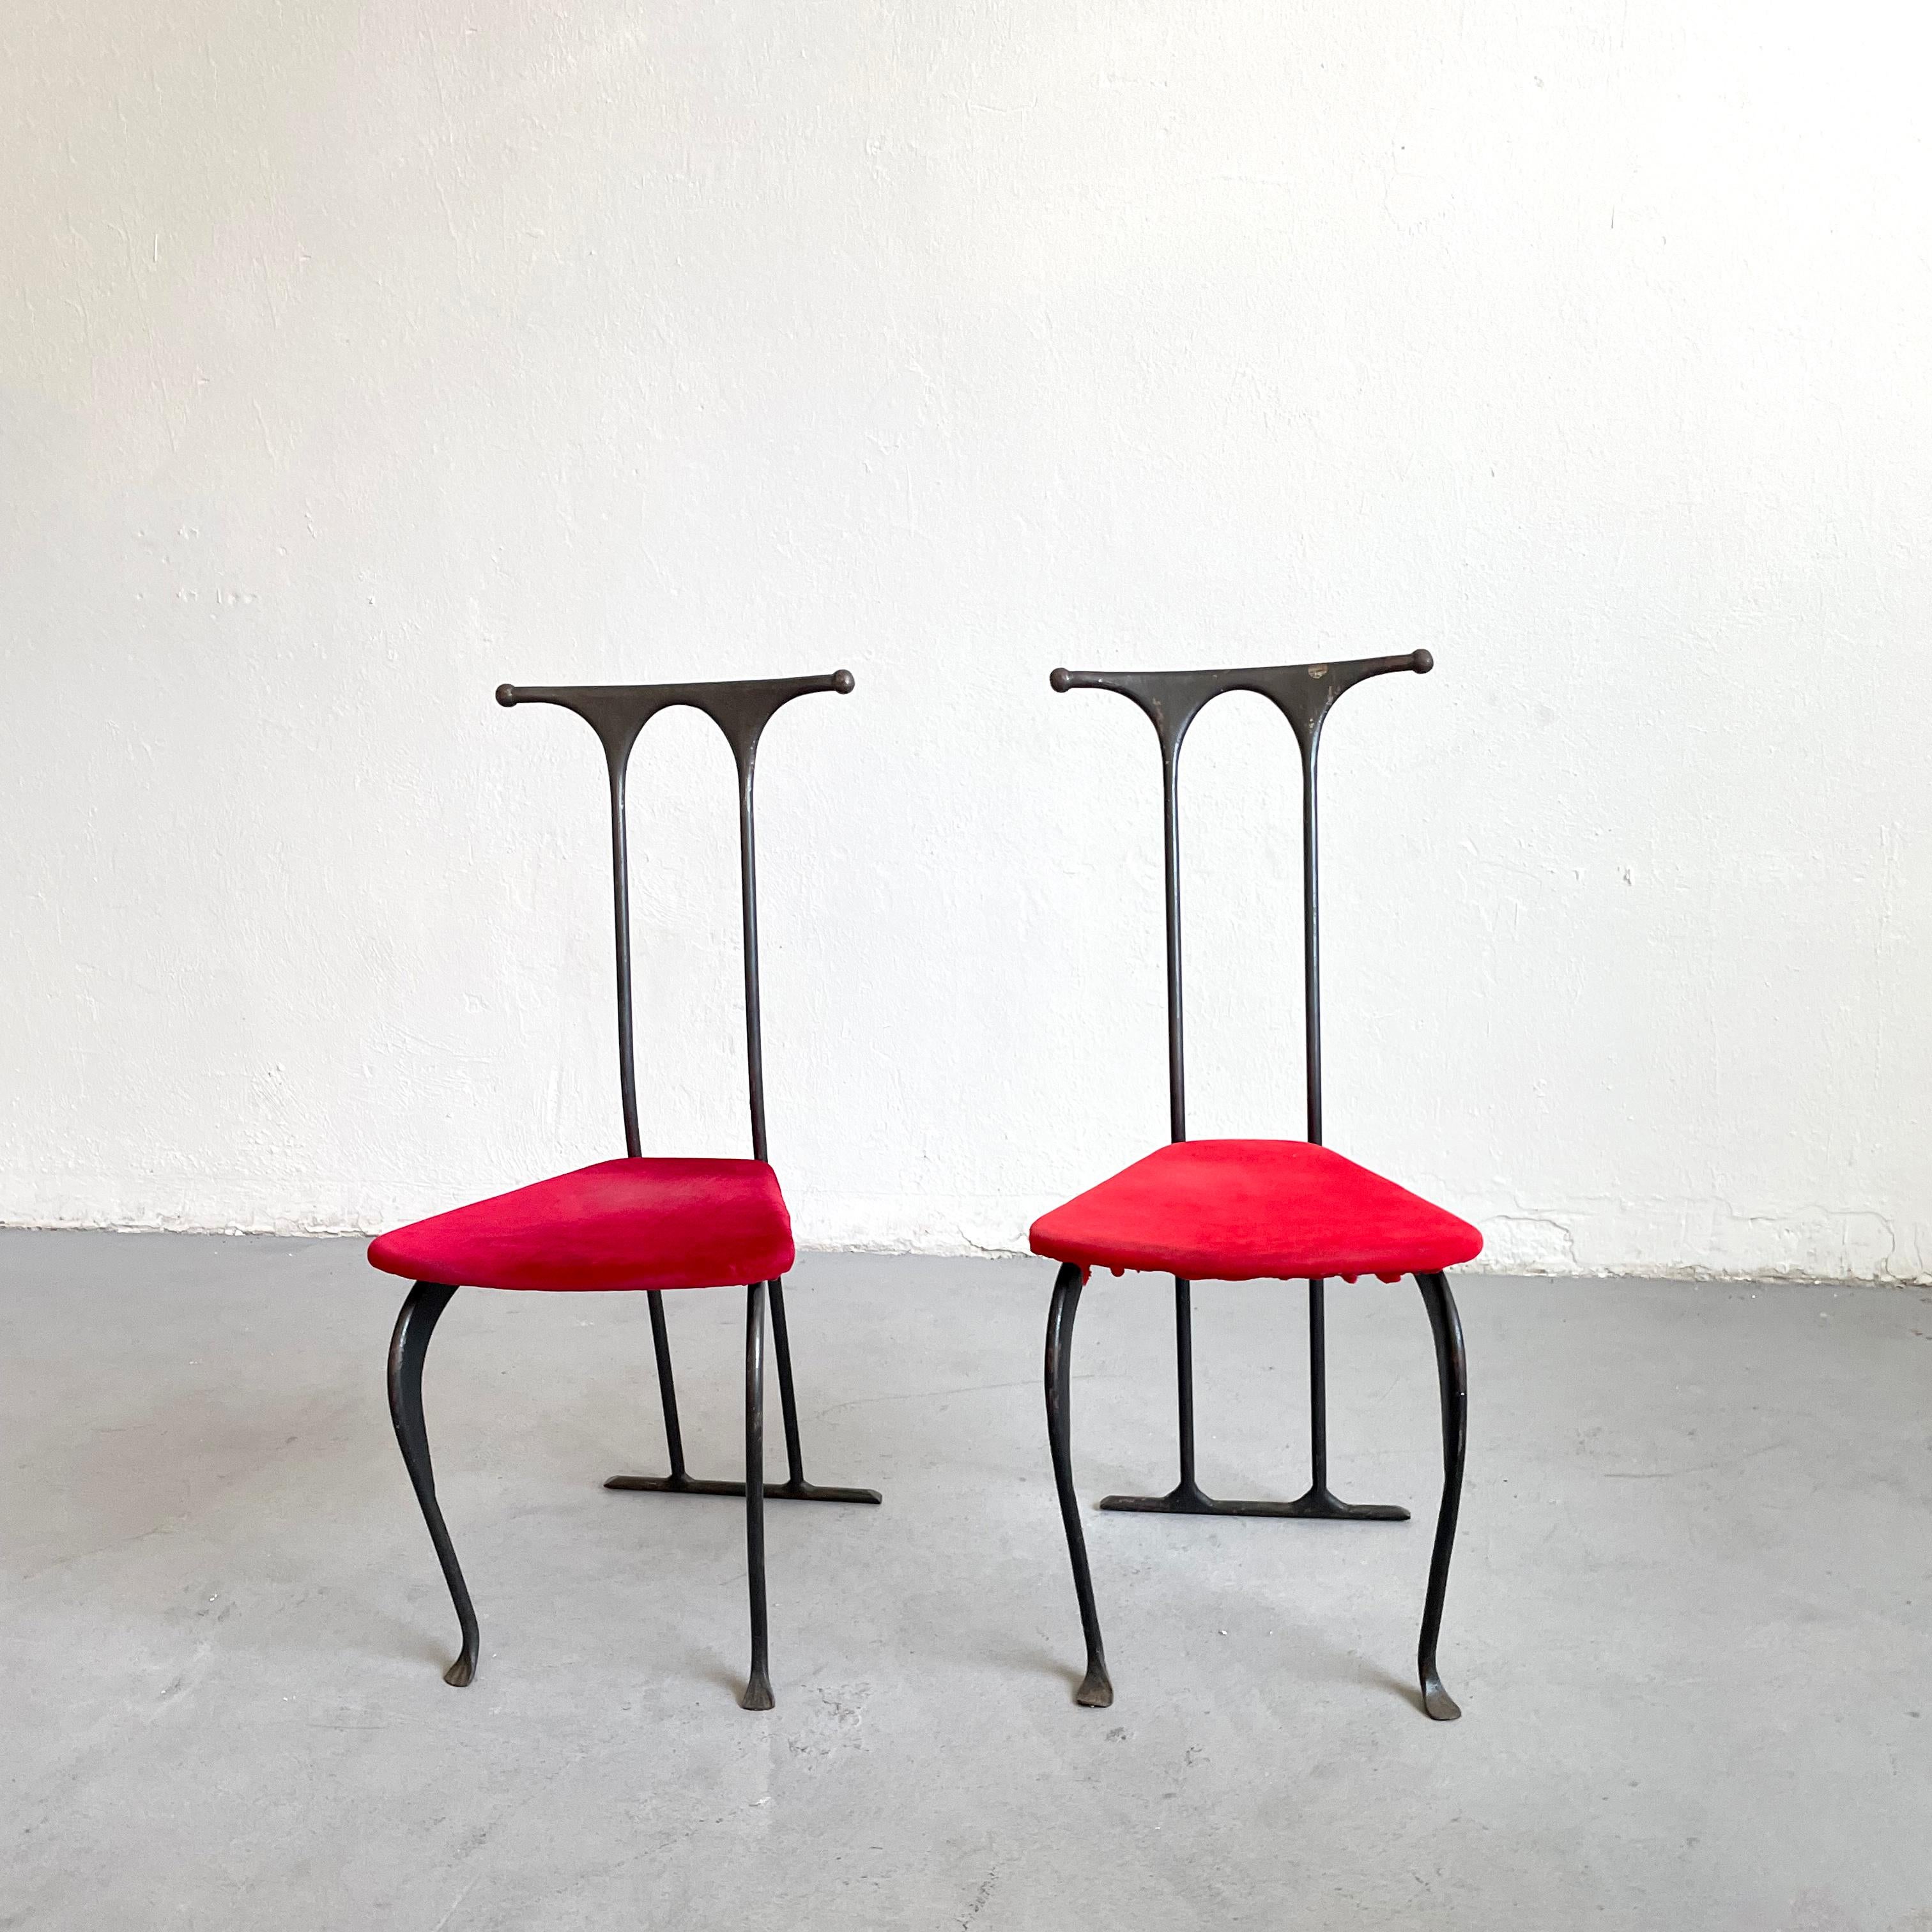 Pair of Postmodern Brutalist Artisanal Wrought Iron Chairs, Poland, 1980s 7